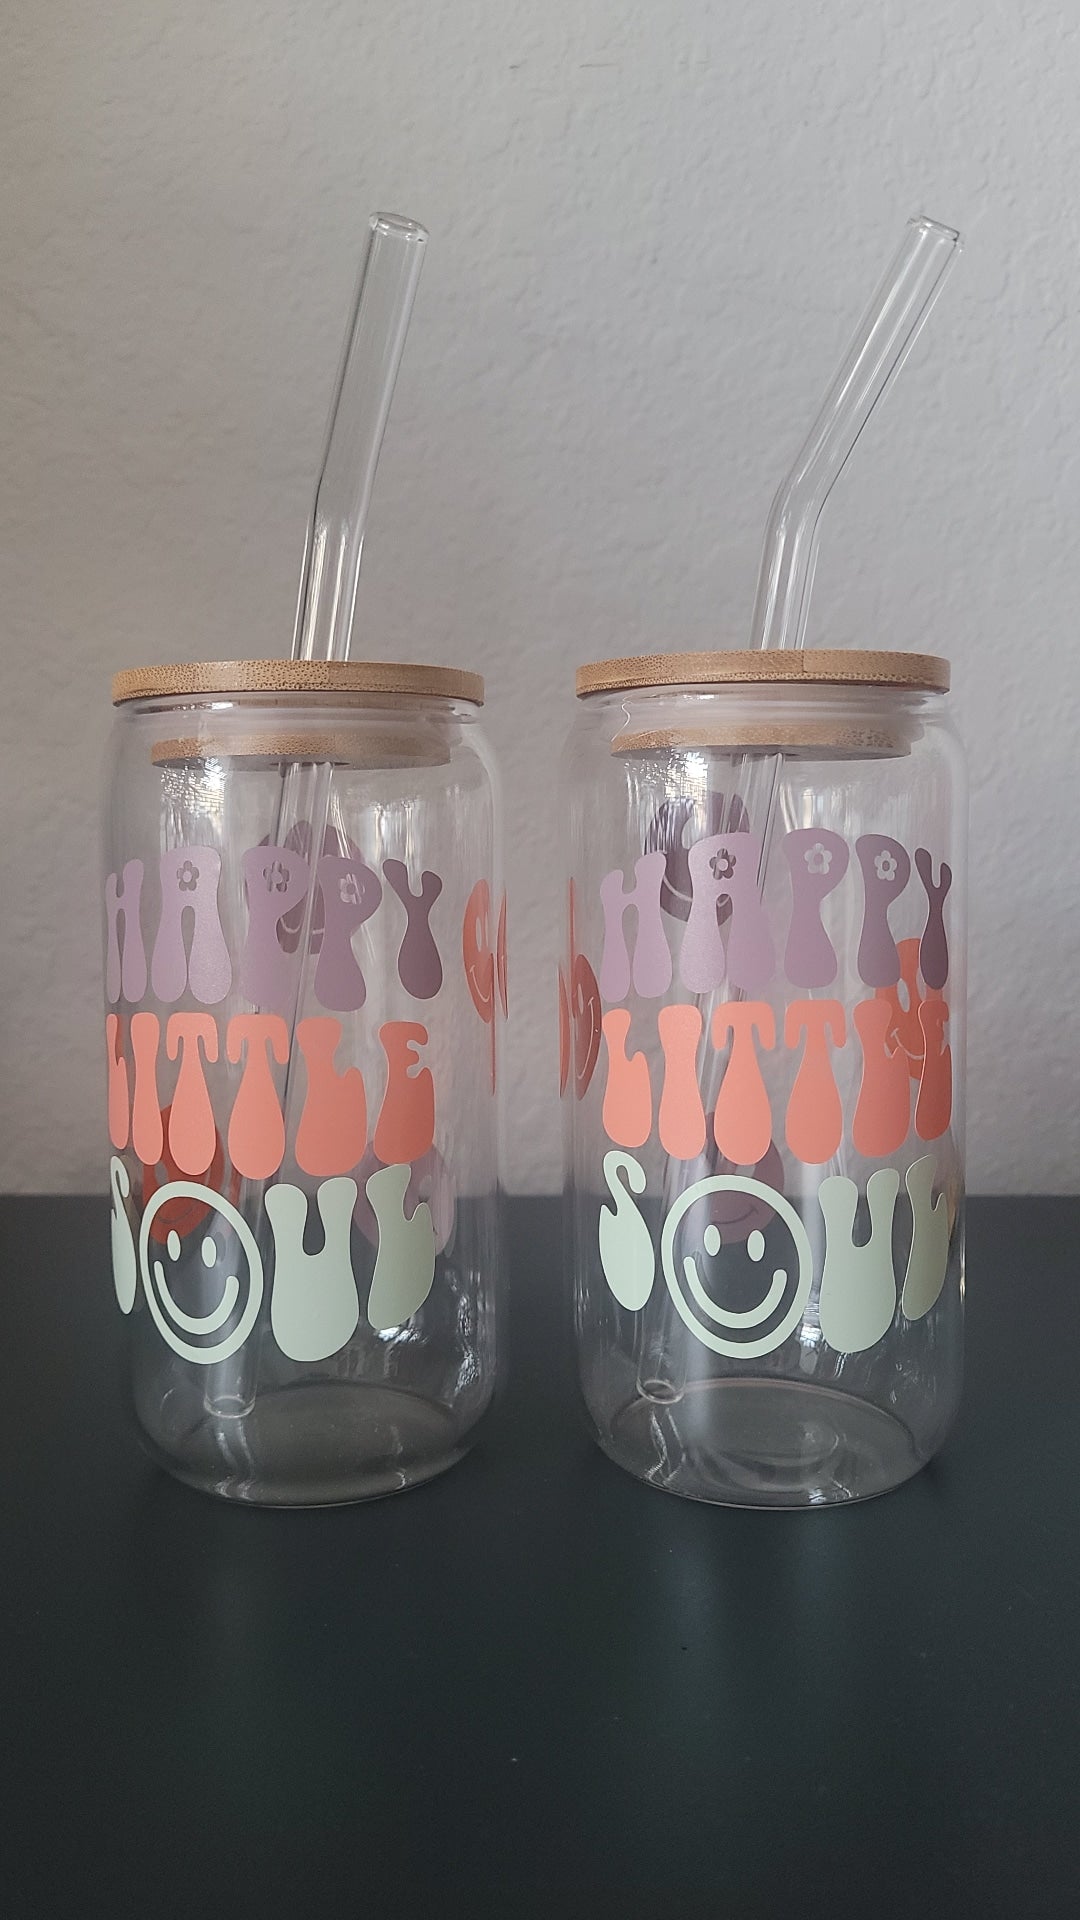 Cute Glass Mug With Bamboo Lid and Plastic Straw 